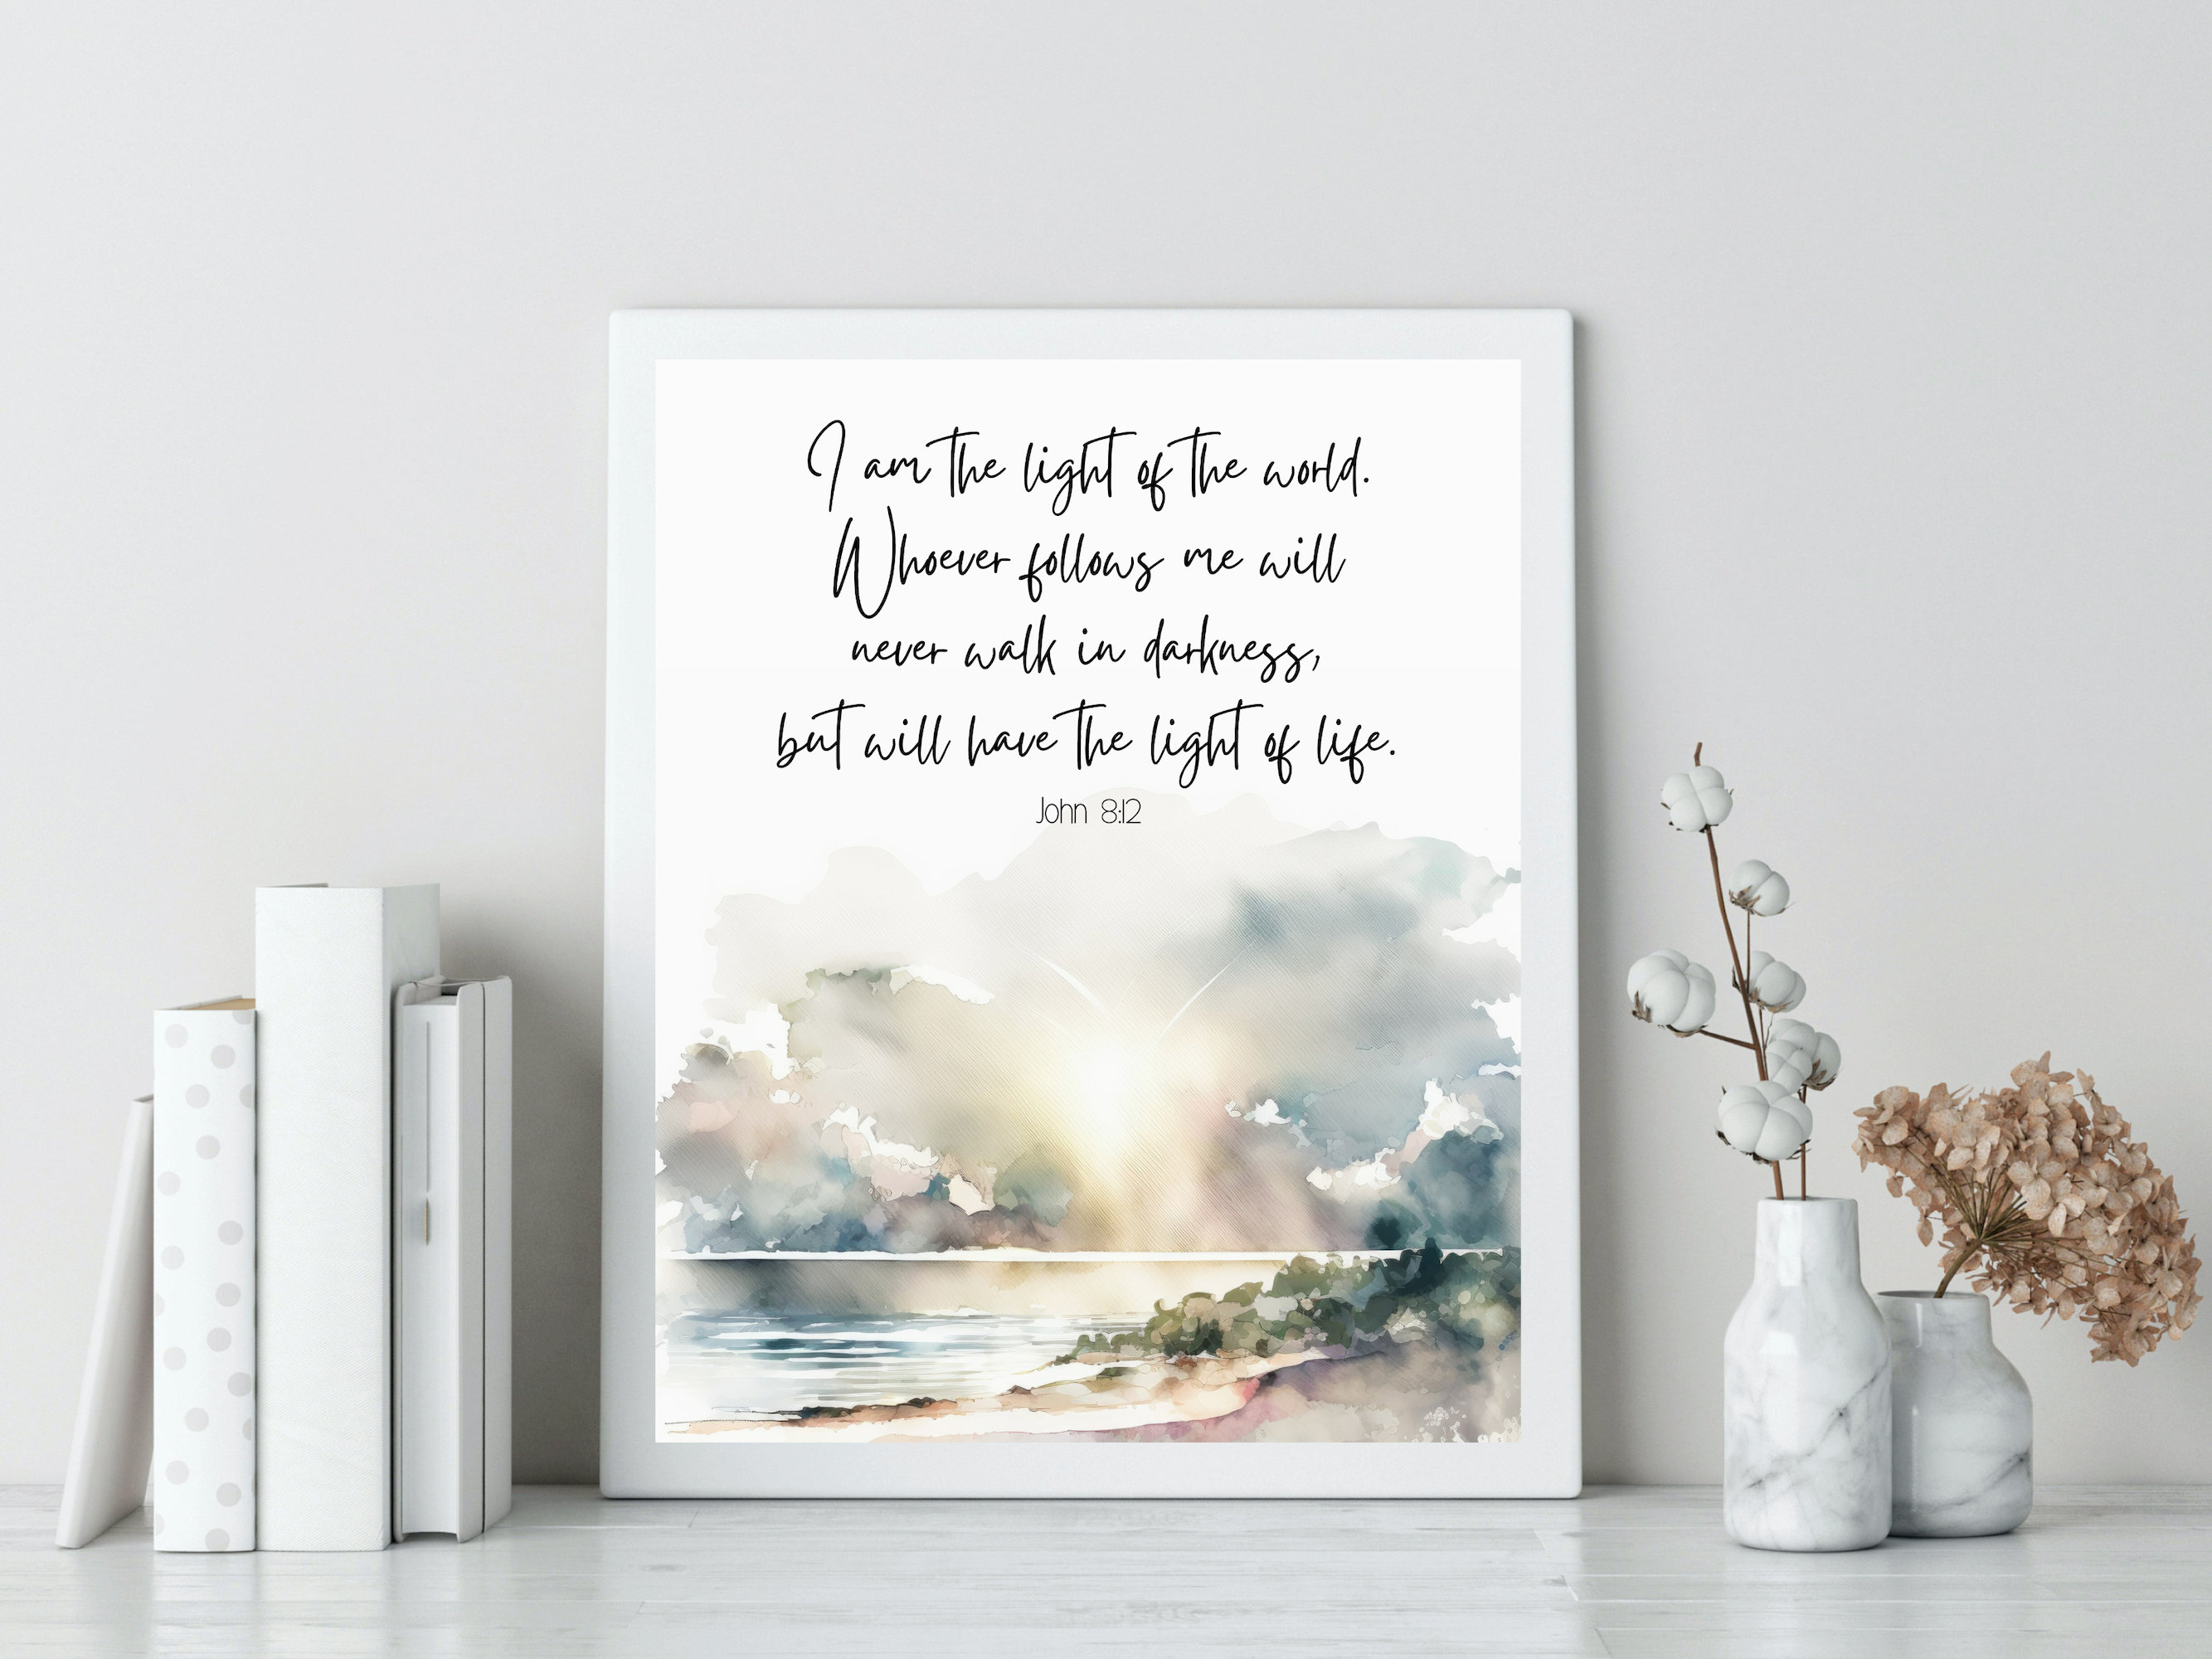 My Kingdom Is Not Of This World - Jesus Quote - Posters and Art Prints